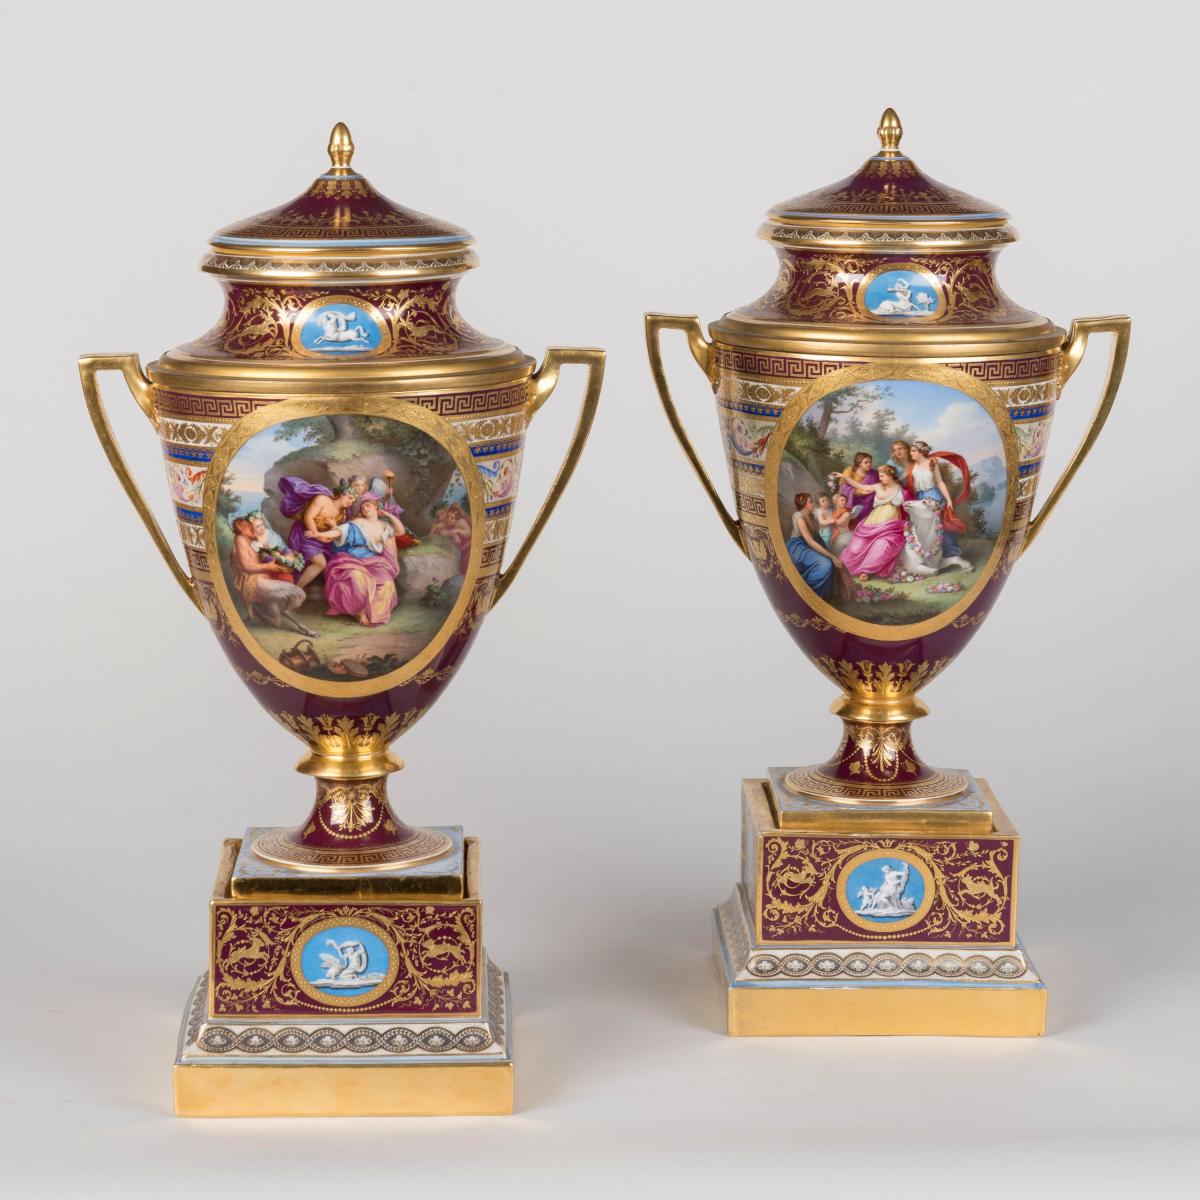 A Rare and Finely Decorated Pair of Porcelain Ice cream Pails on Stands